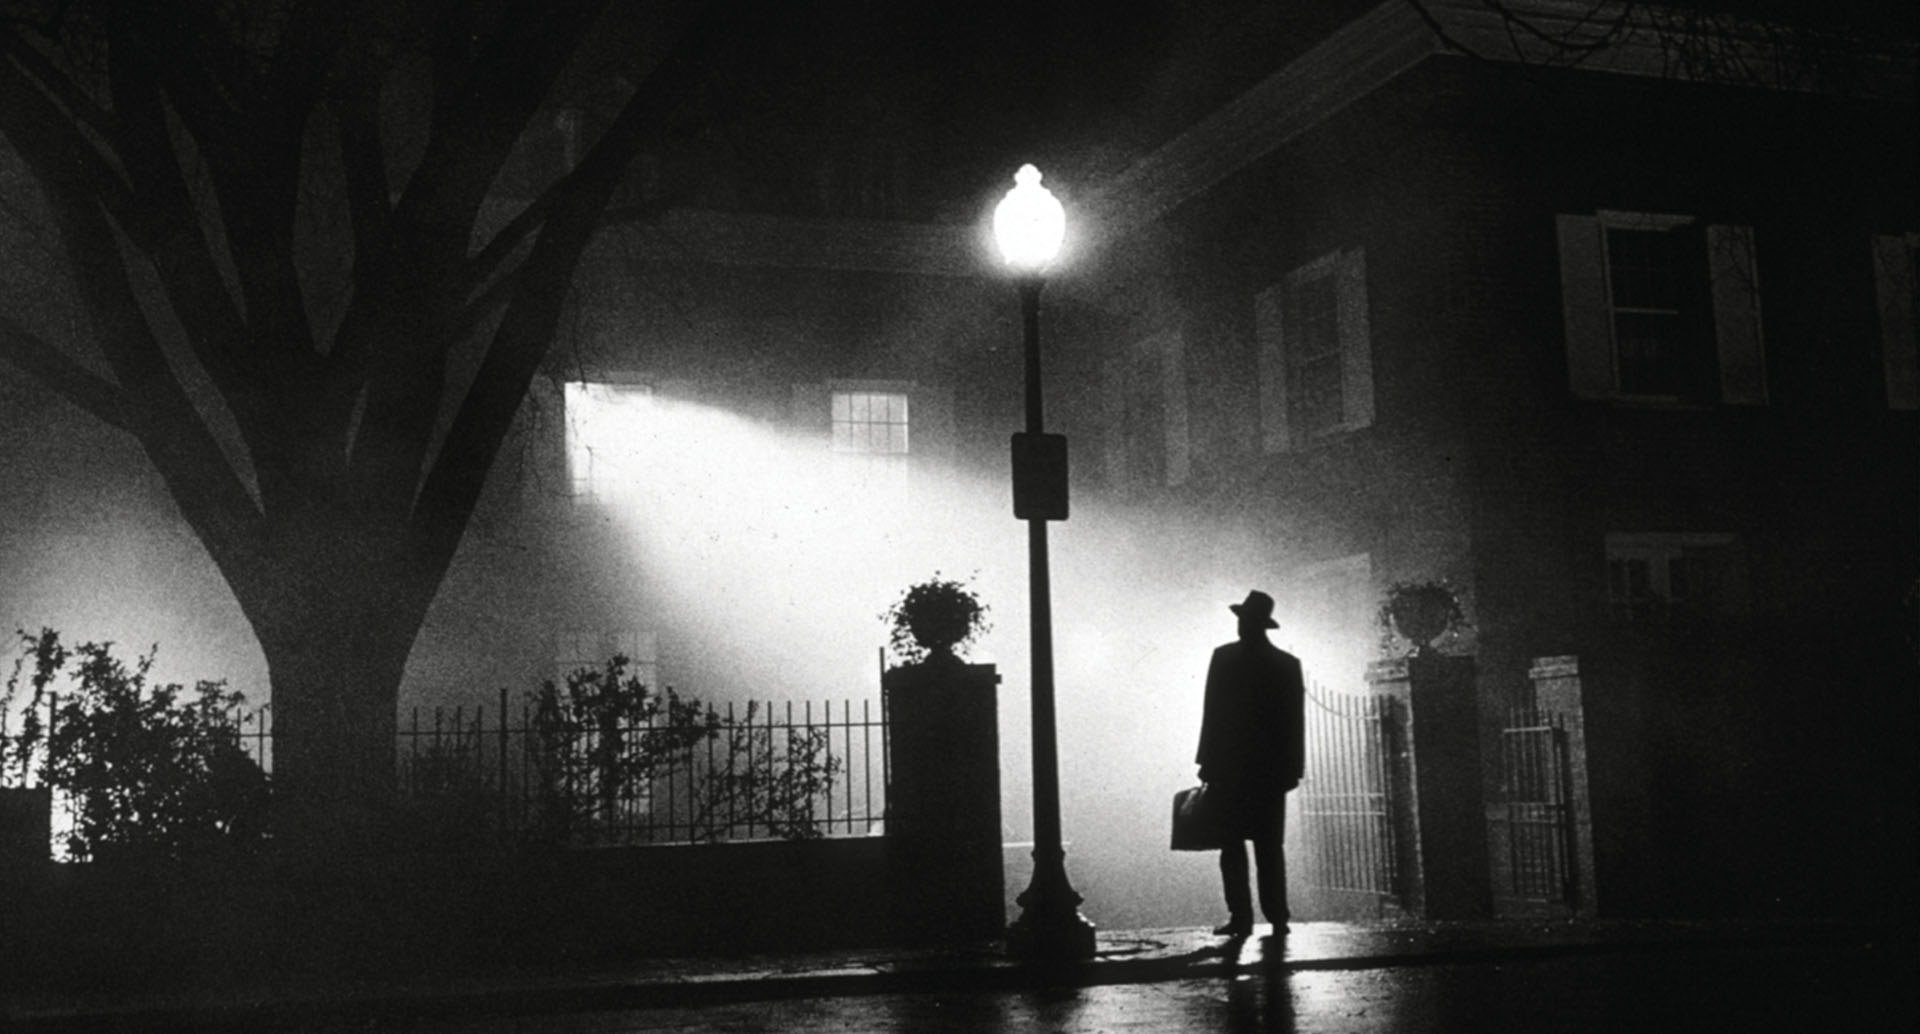  Max von Sydow, star of ‘The Exorcist’ dies aged 90